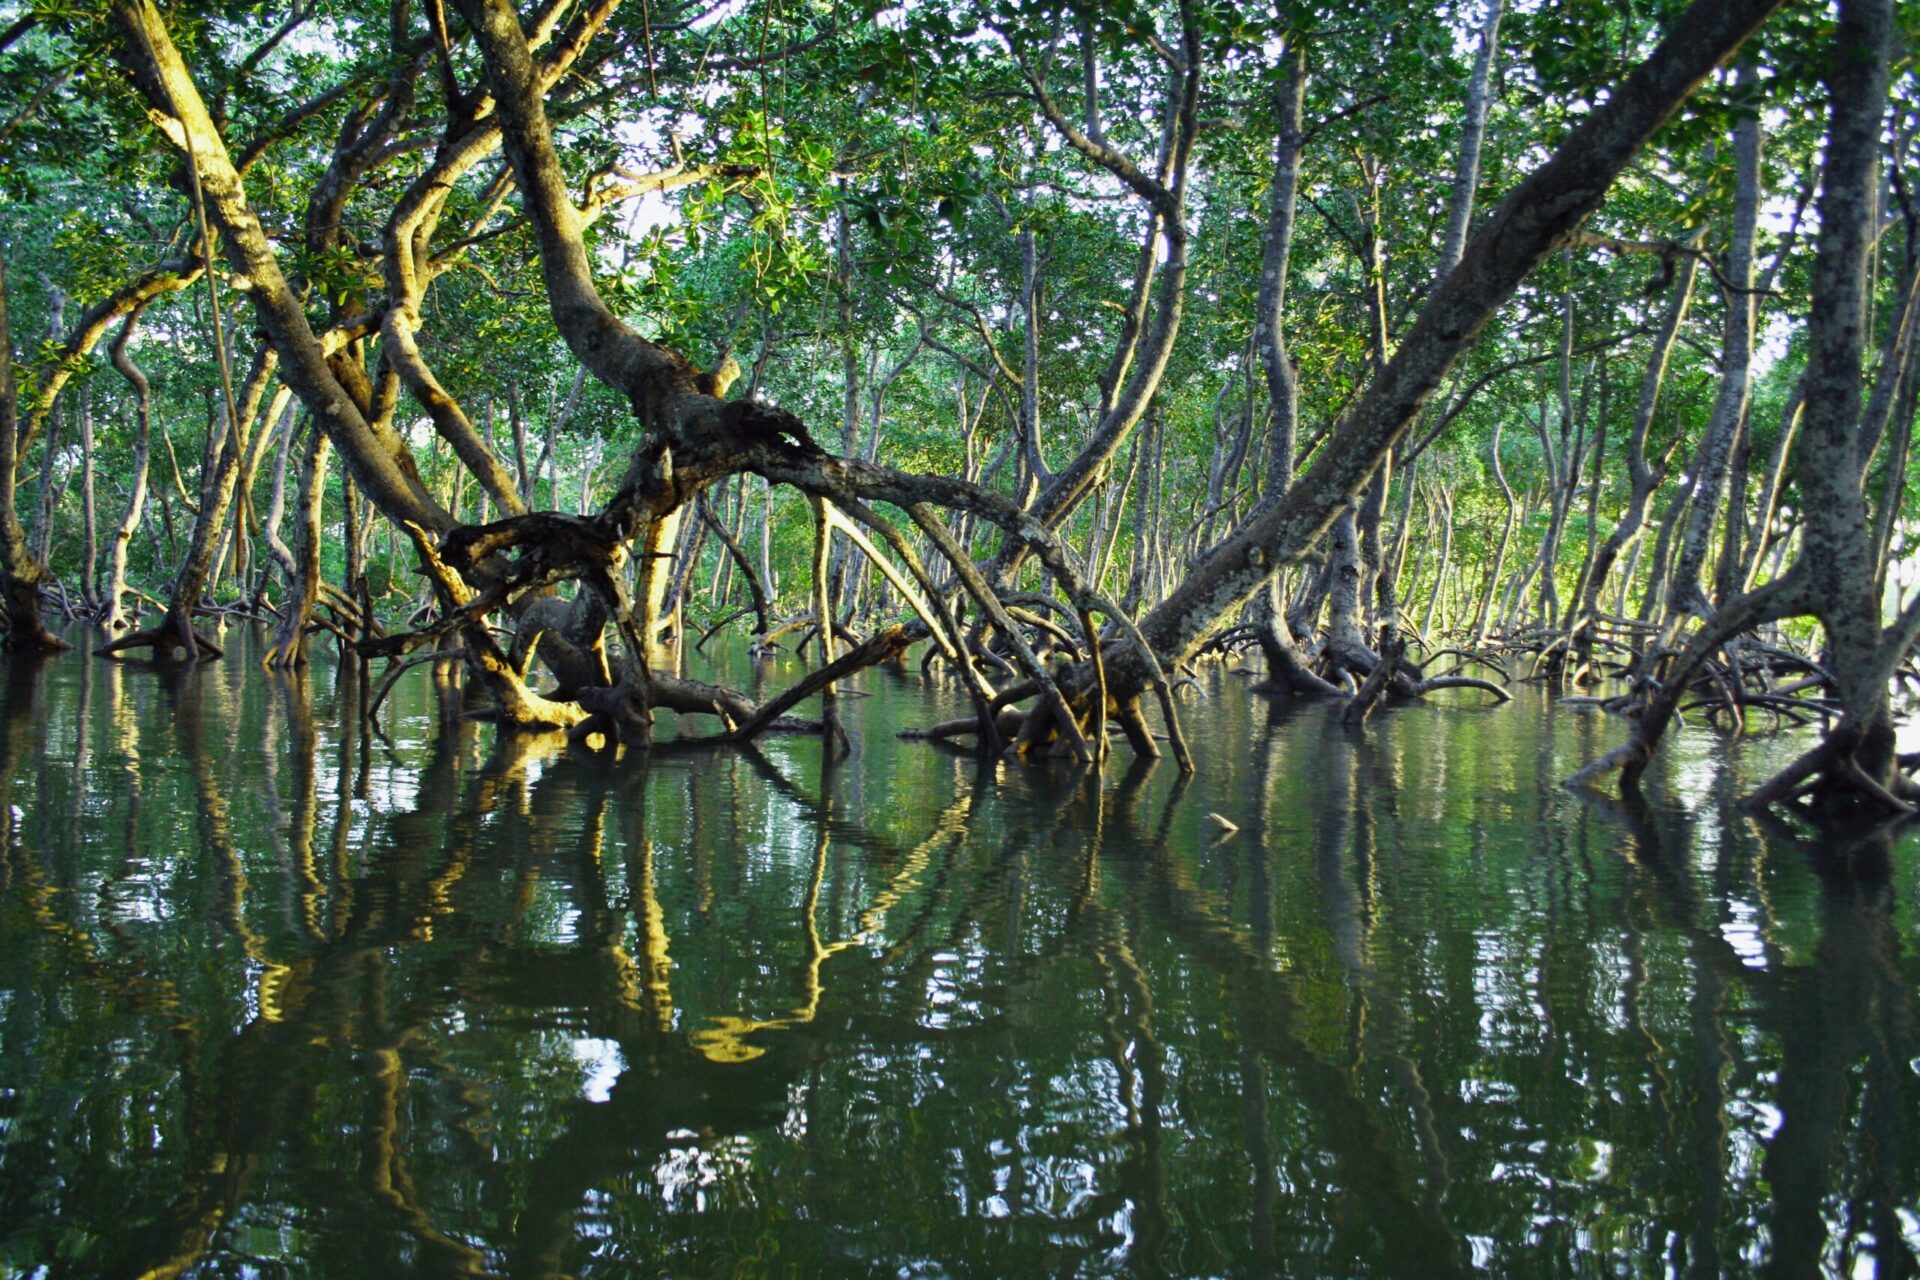 mangrove roots in a swamp